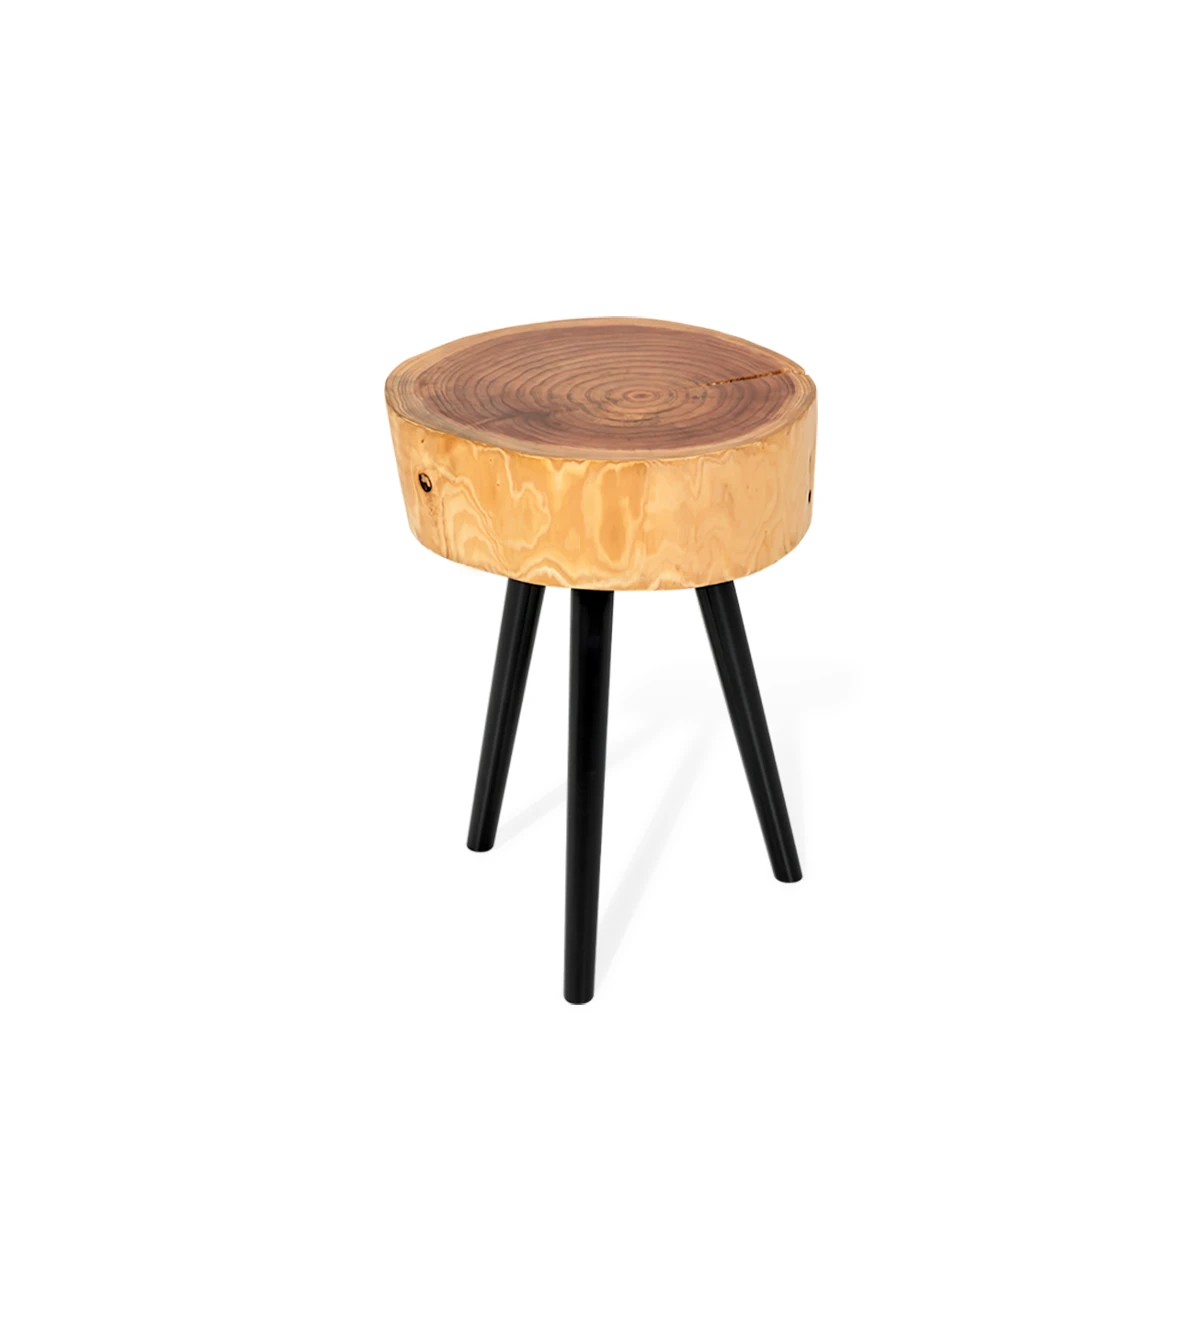 Trunk side table in natural cryptomeria wood, black lacquered feet, Ø 35 to 45 cm.